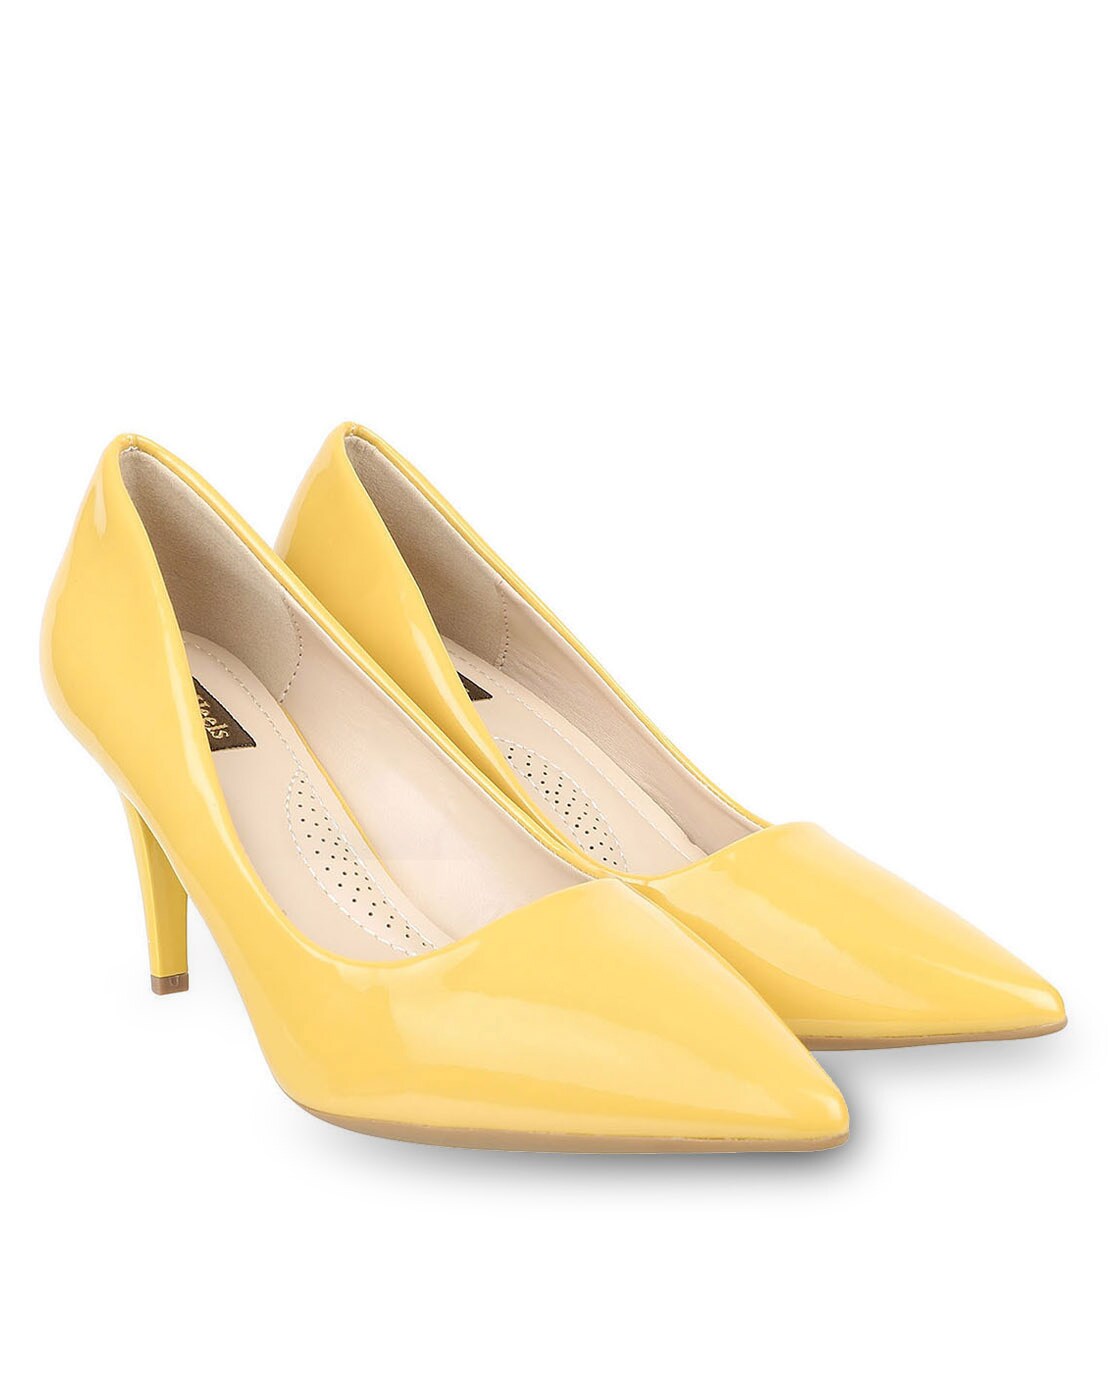 Buy Best Yellow Formal Shoes From Top Brands Online In India